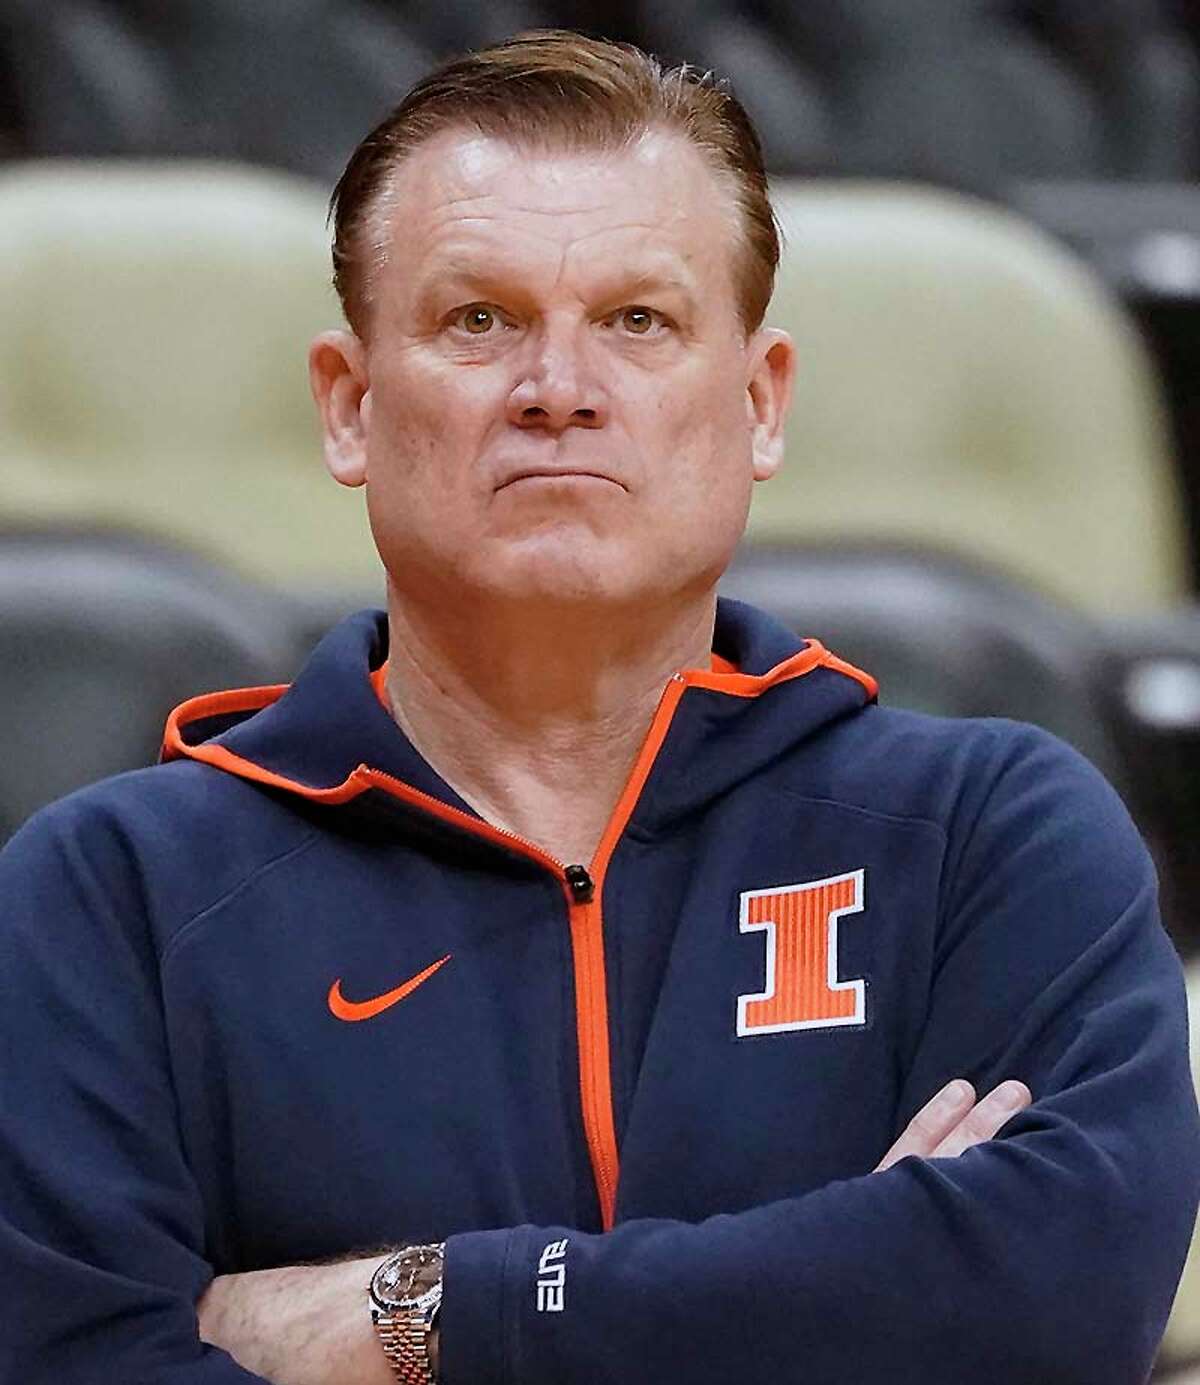 Illinois head coach Brad Underwood believes a new crop of talent can help his team stay near the top of the Big Ten this season. The Illini are ranked No. 23 in the AP Preseason College Basketball Poll.